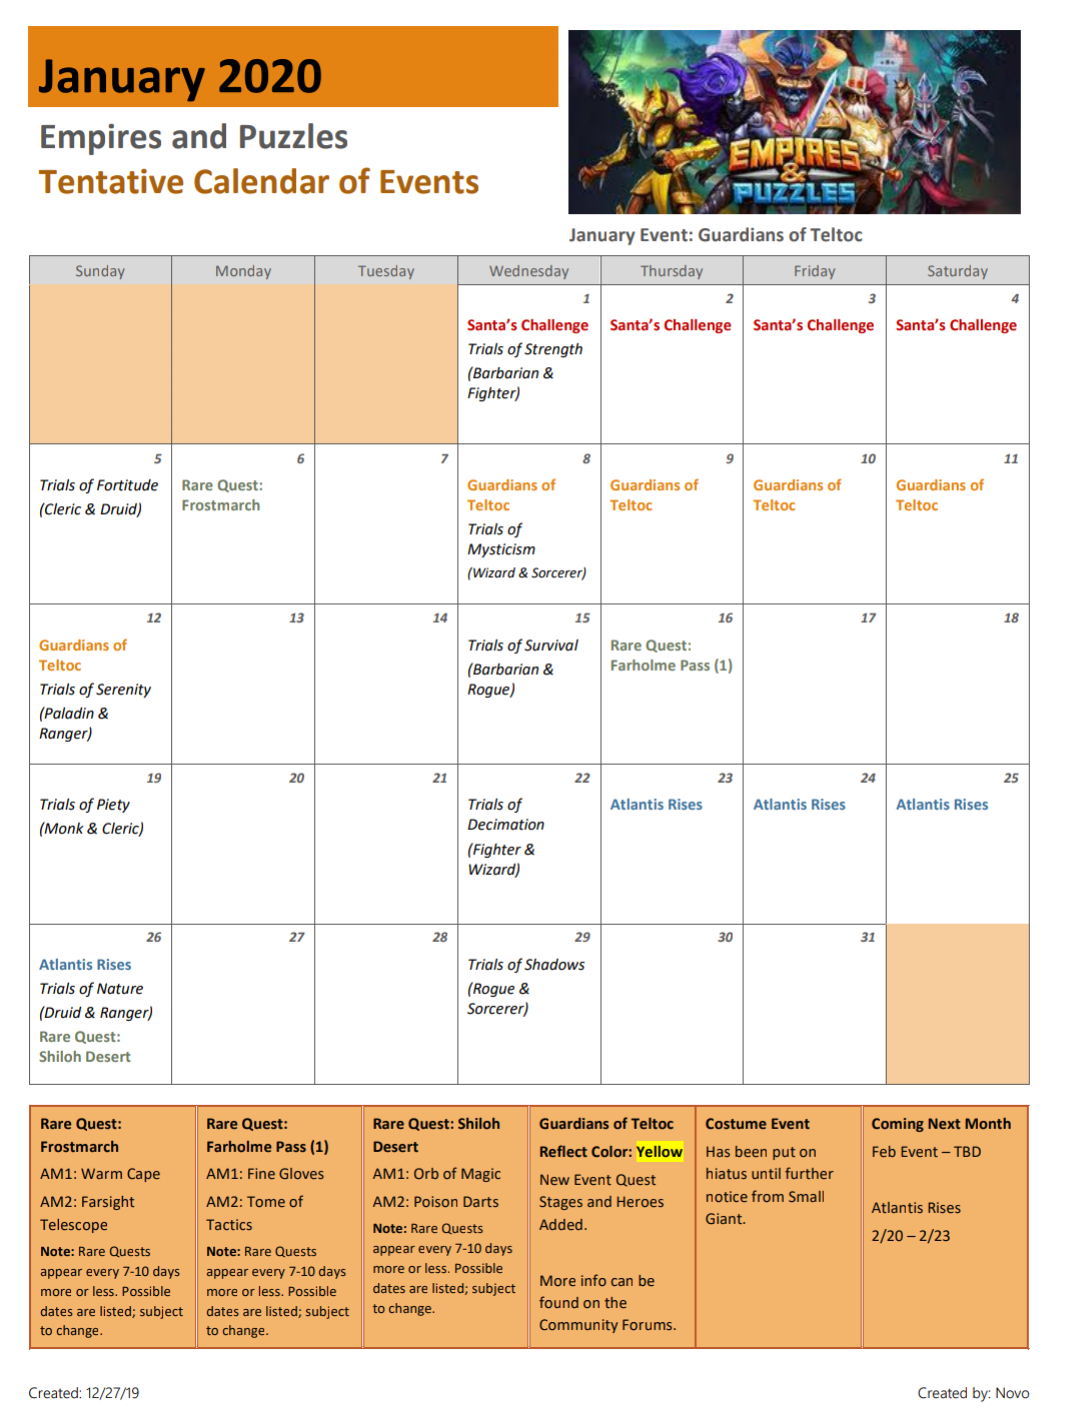 2020 January Calendar Of Events (Dates Are Tentative And inside Empires And Puzzles Quest Schedule